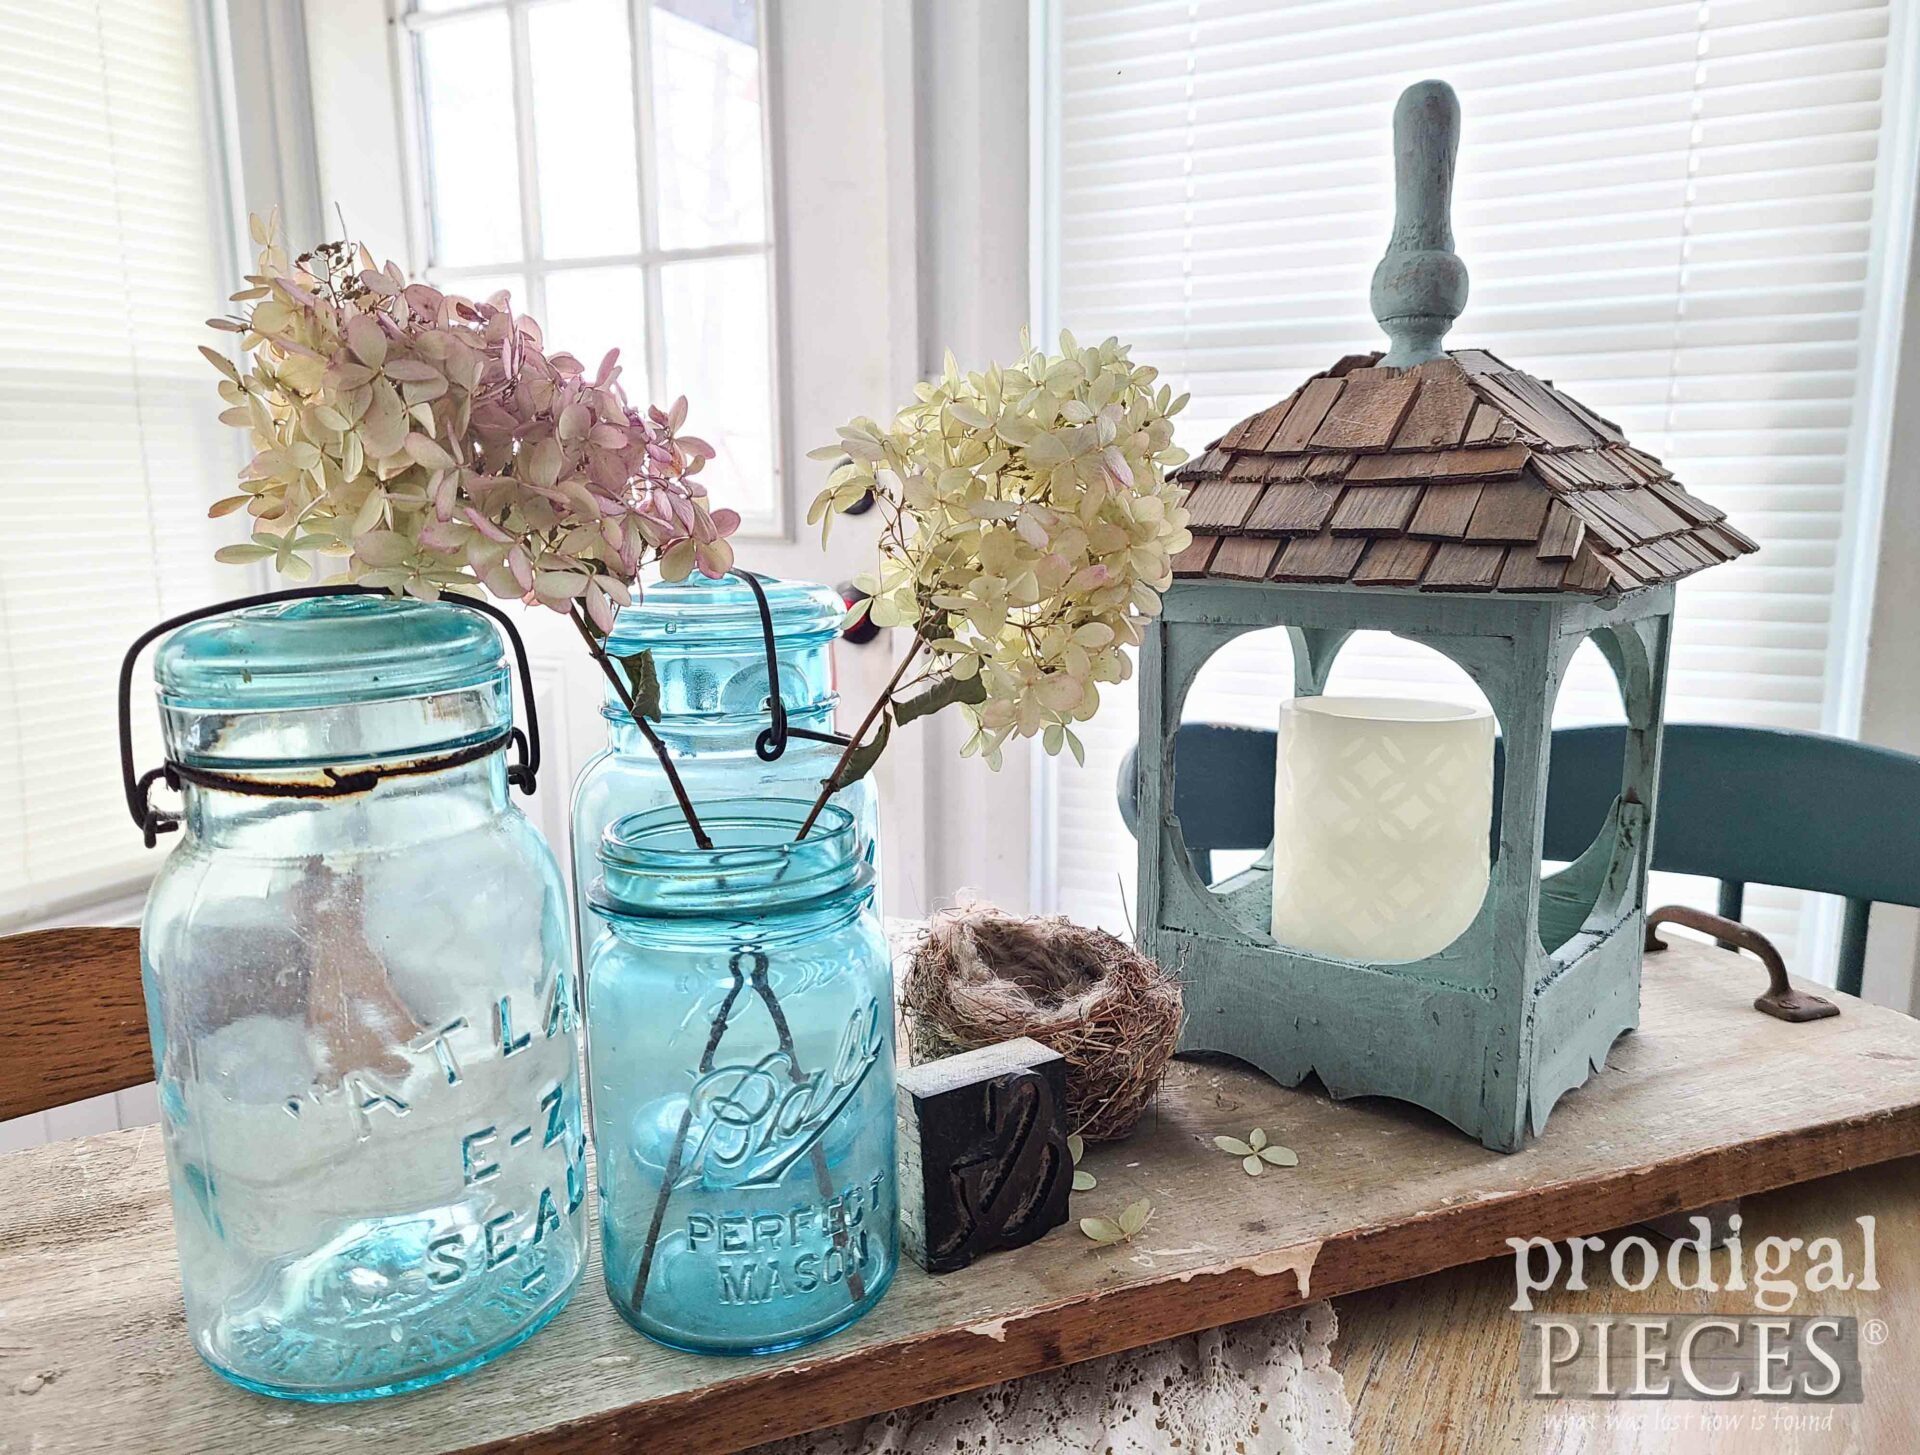 Blue Ball Jars with Cottage Lantern by Larissa of Prodigal Pieces | prodigalpieces.com #prodigalpieces #cottage #diy #upcycled